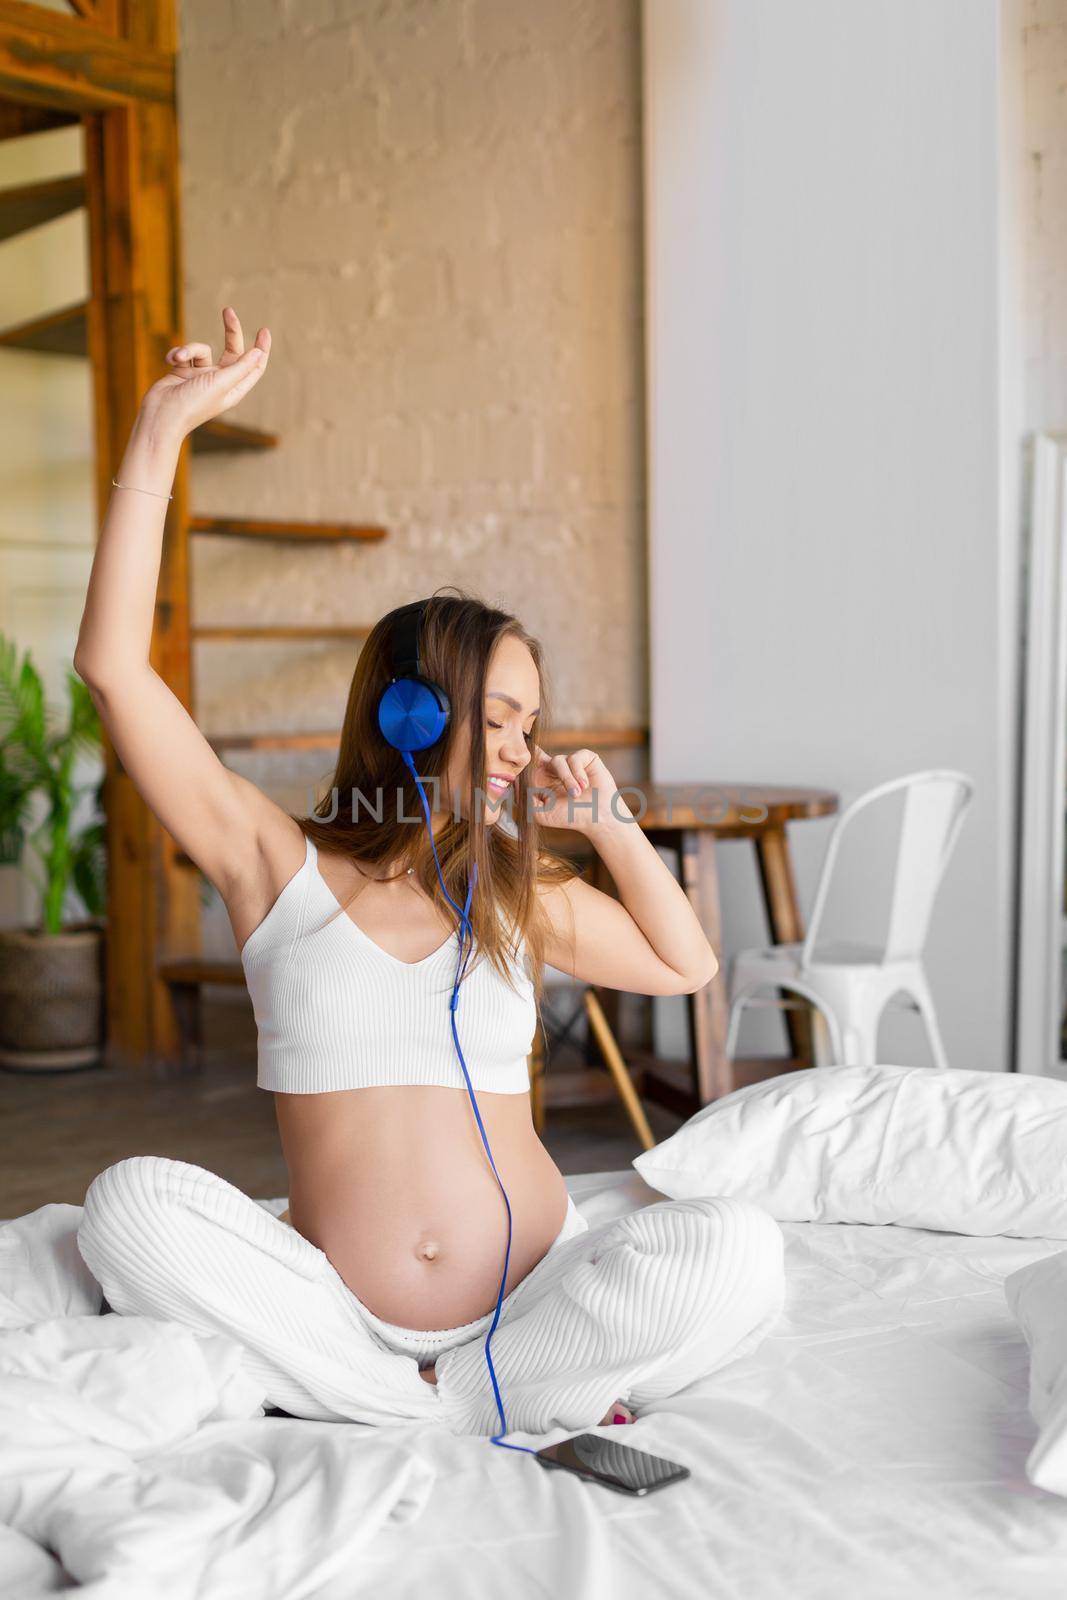 Pregnant woman sits on a bed in home interior and enjoys soothing music. She listening to the music via online smartphone application.